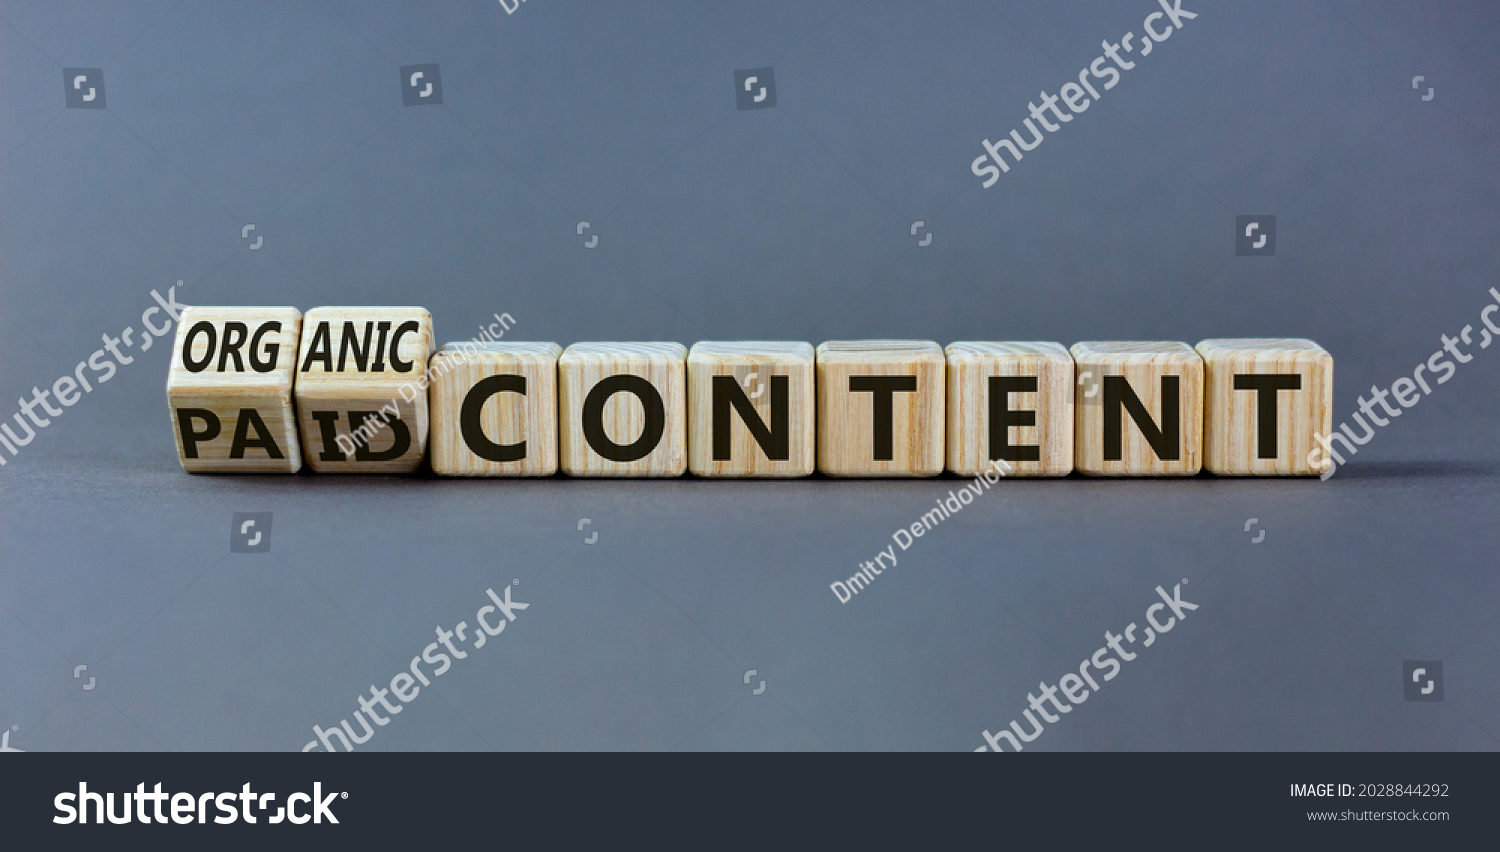 Paid or organic content symbol. Turned wooden cubes and changed words 'paid content' to 'organic content'. Beautiful grey table, grey background, copy space. Business, paid or organic content concept. #2028844292